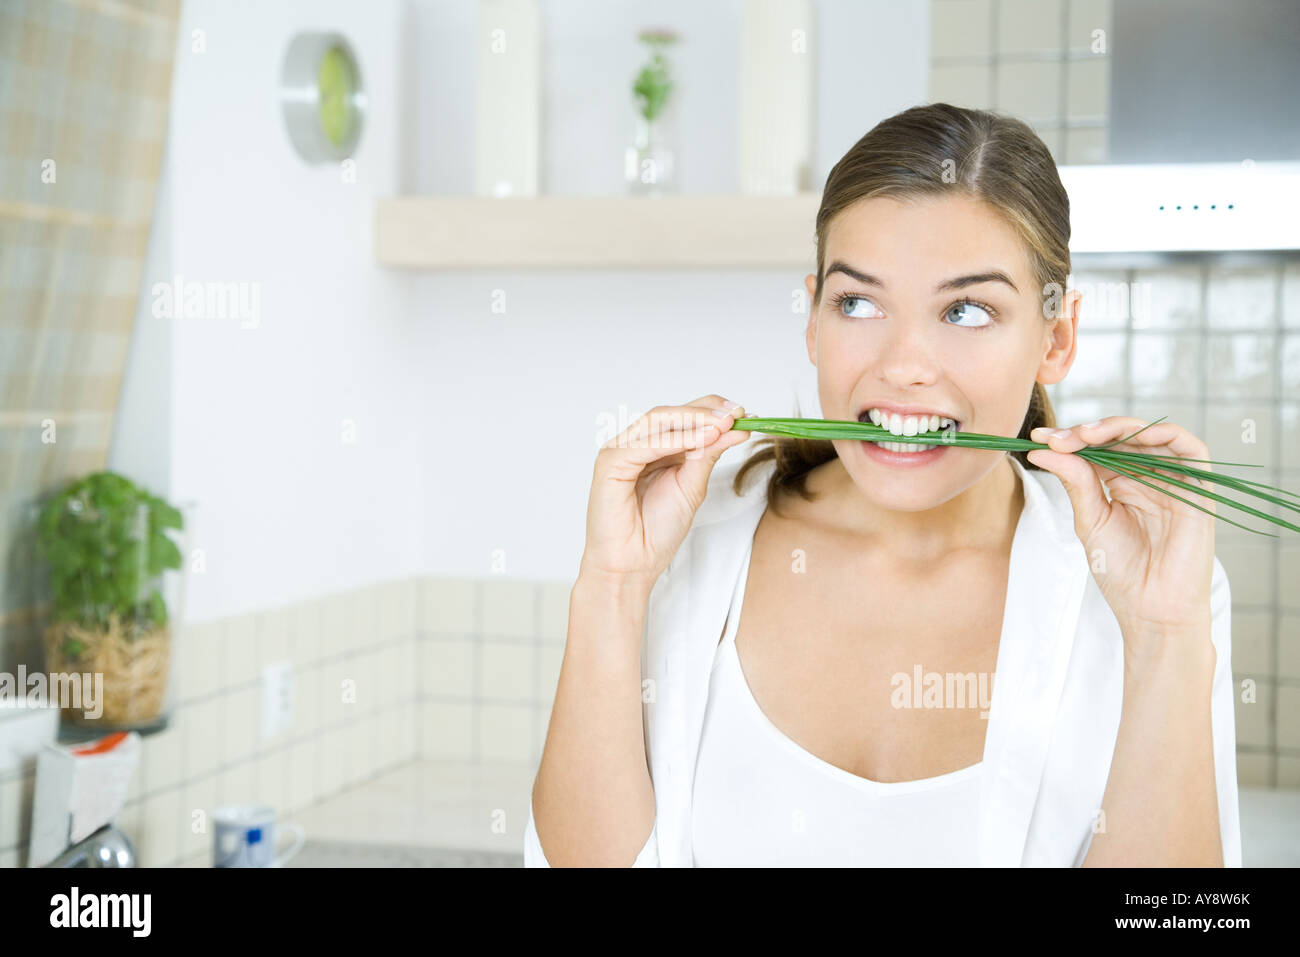 Woman in kitchen, biting into fresh chives, looking away Stock Photo